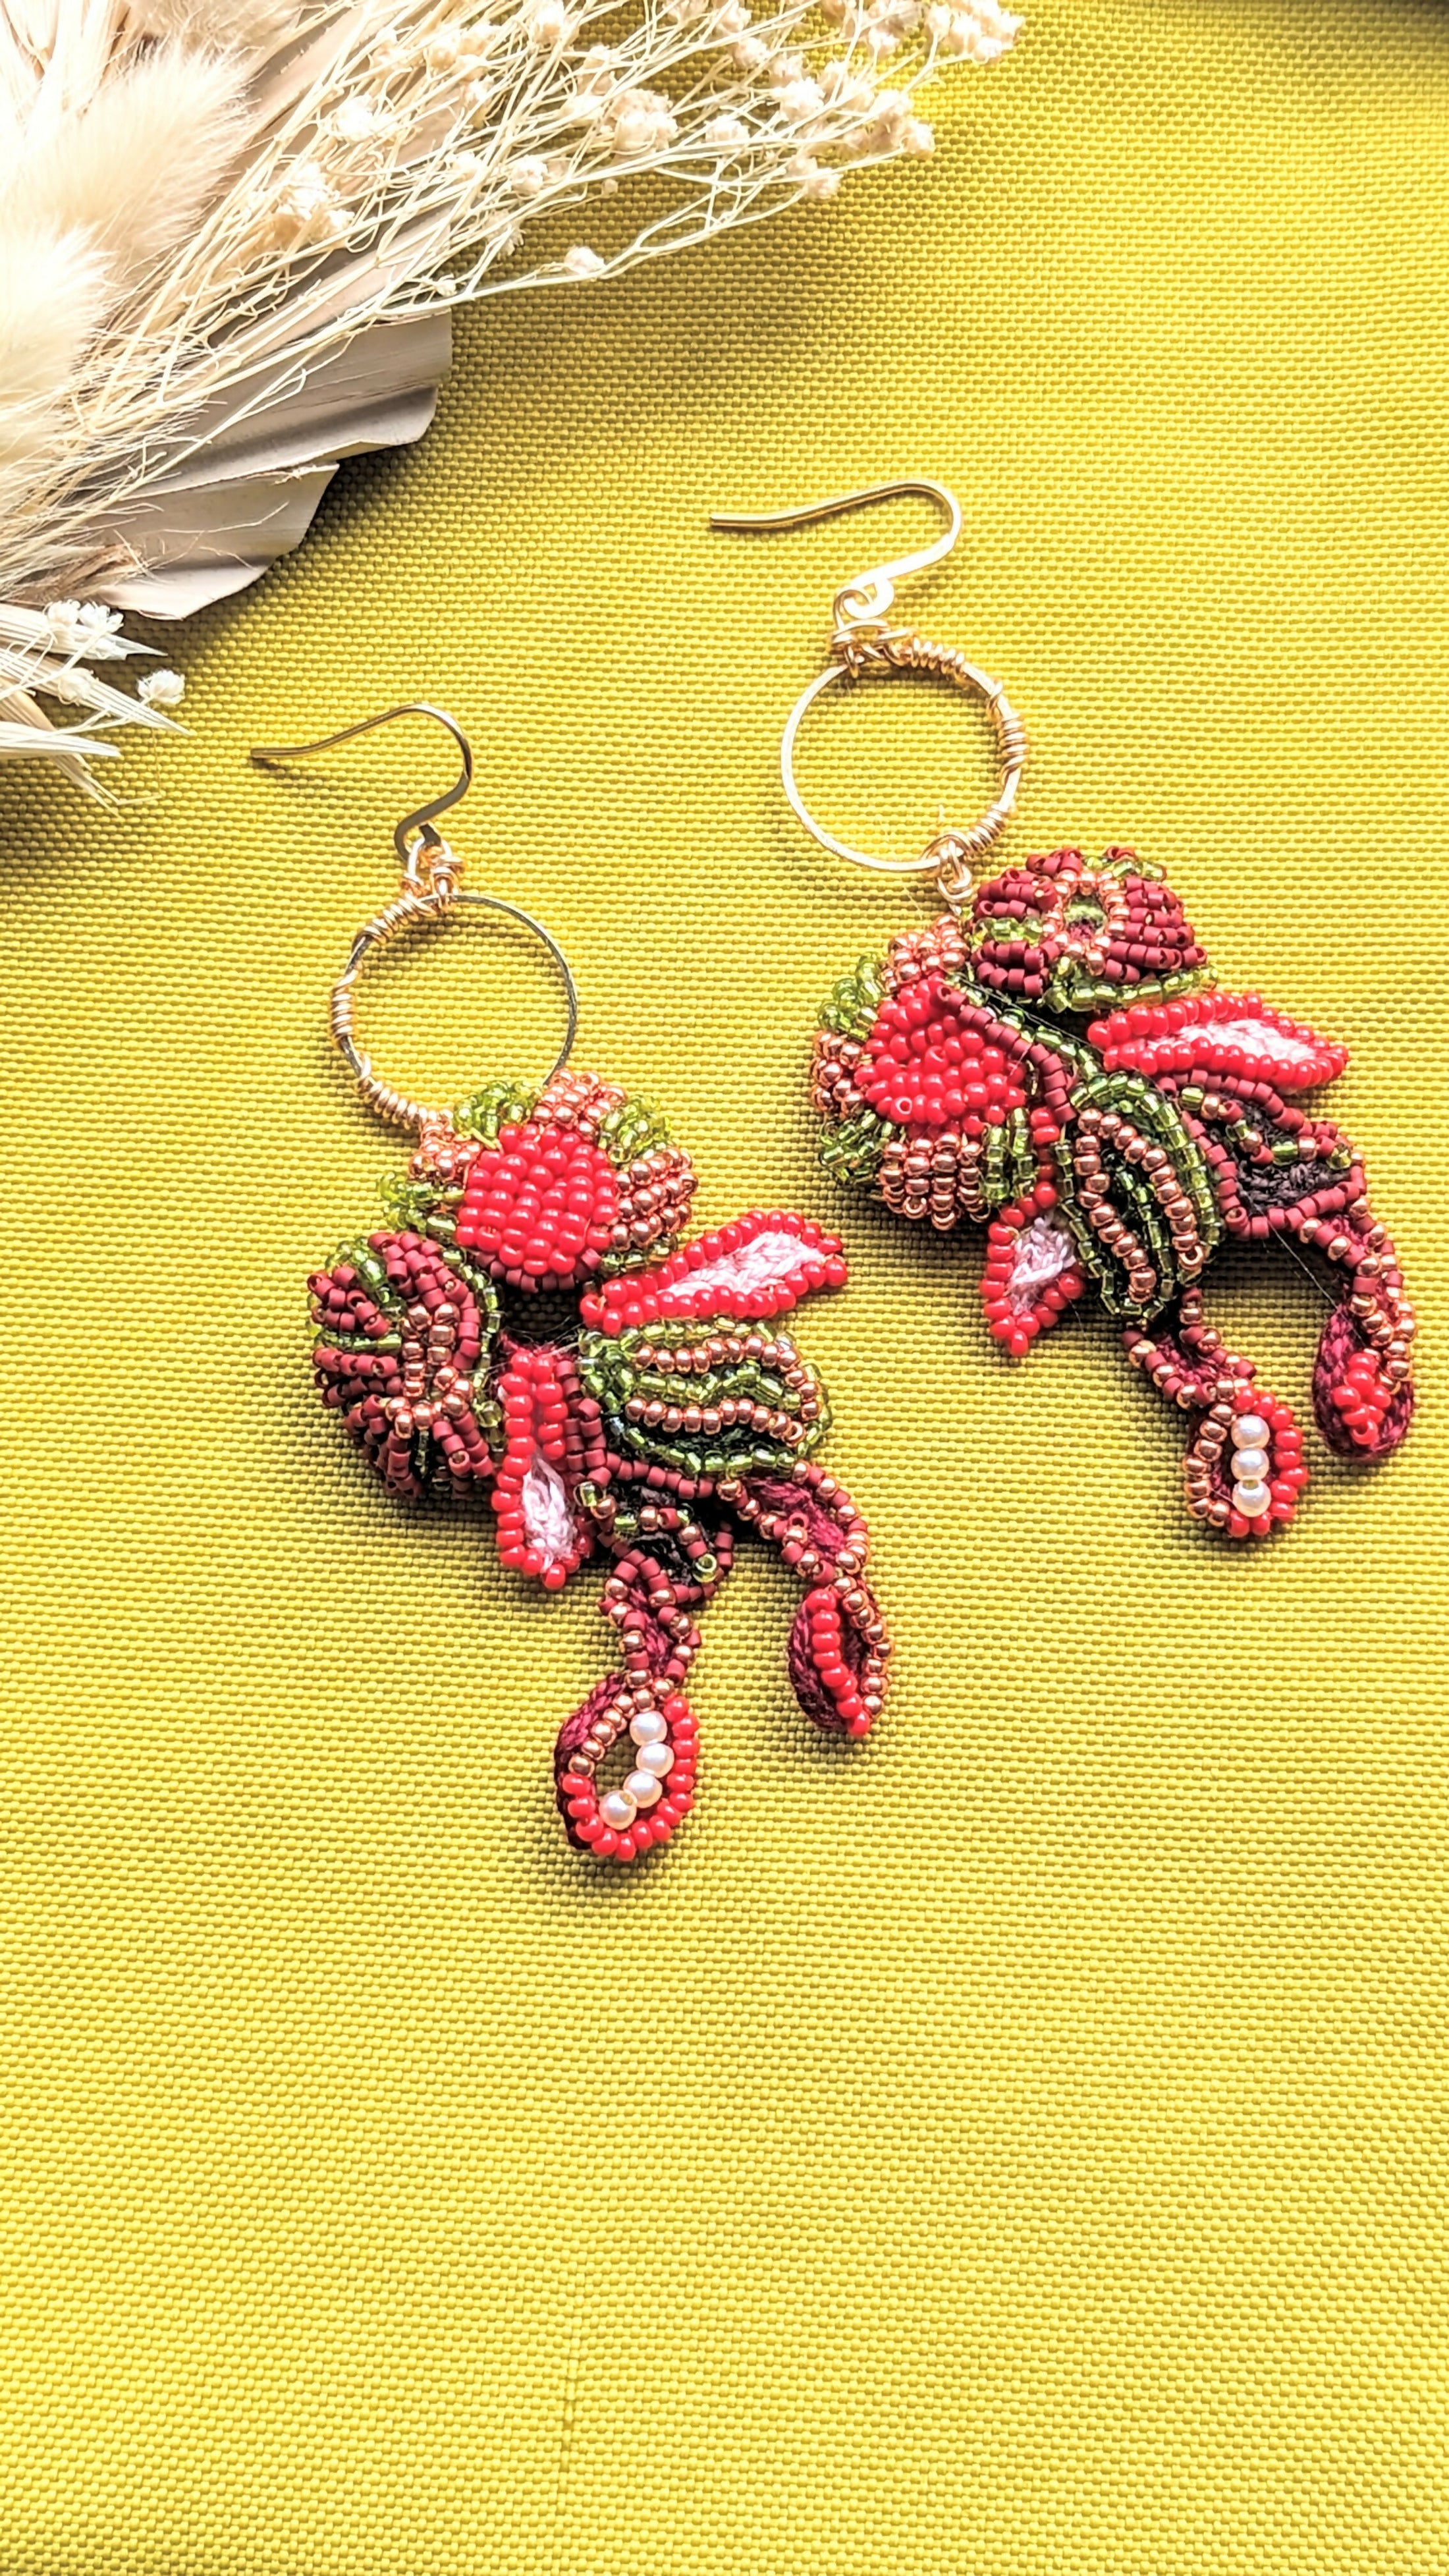 Red Green & Gold Statement Beaded Indian Boho Earrings